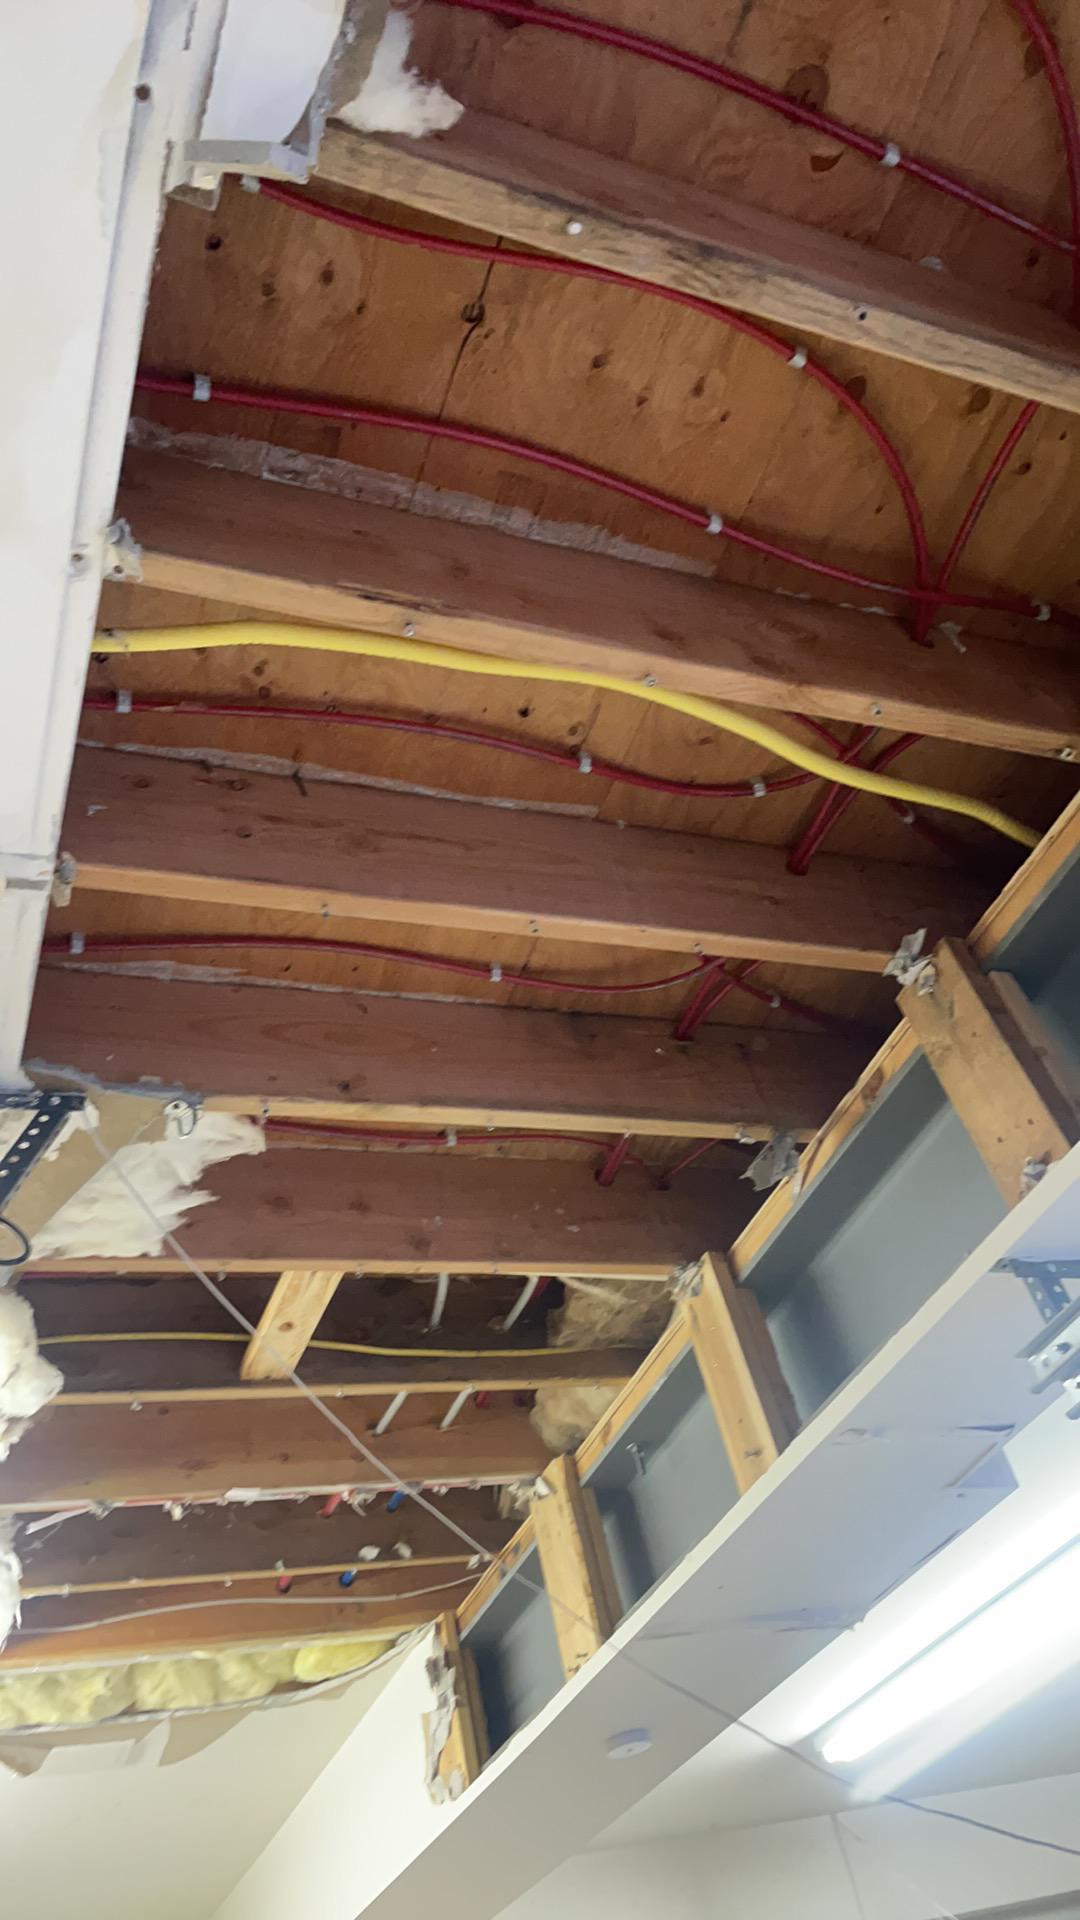 Removal of damaged ceiling